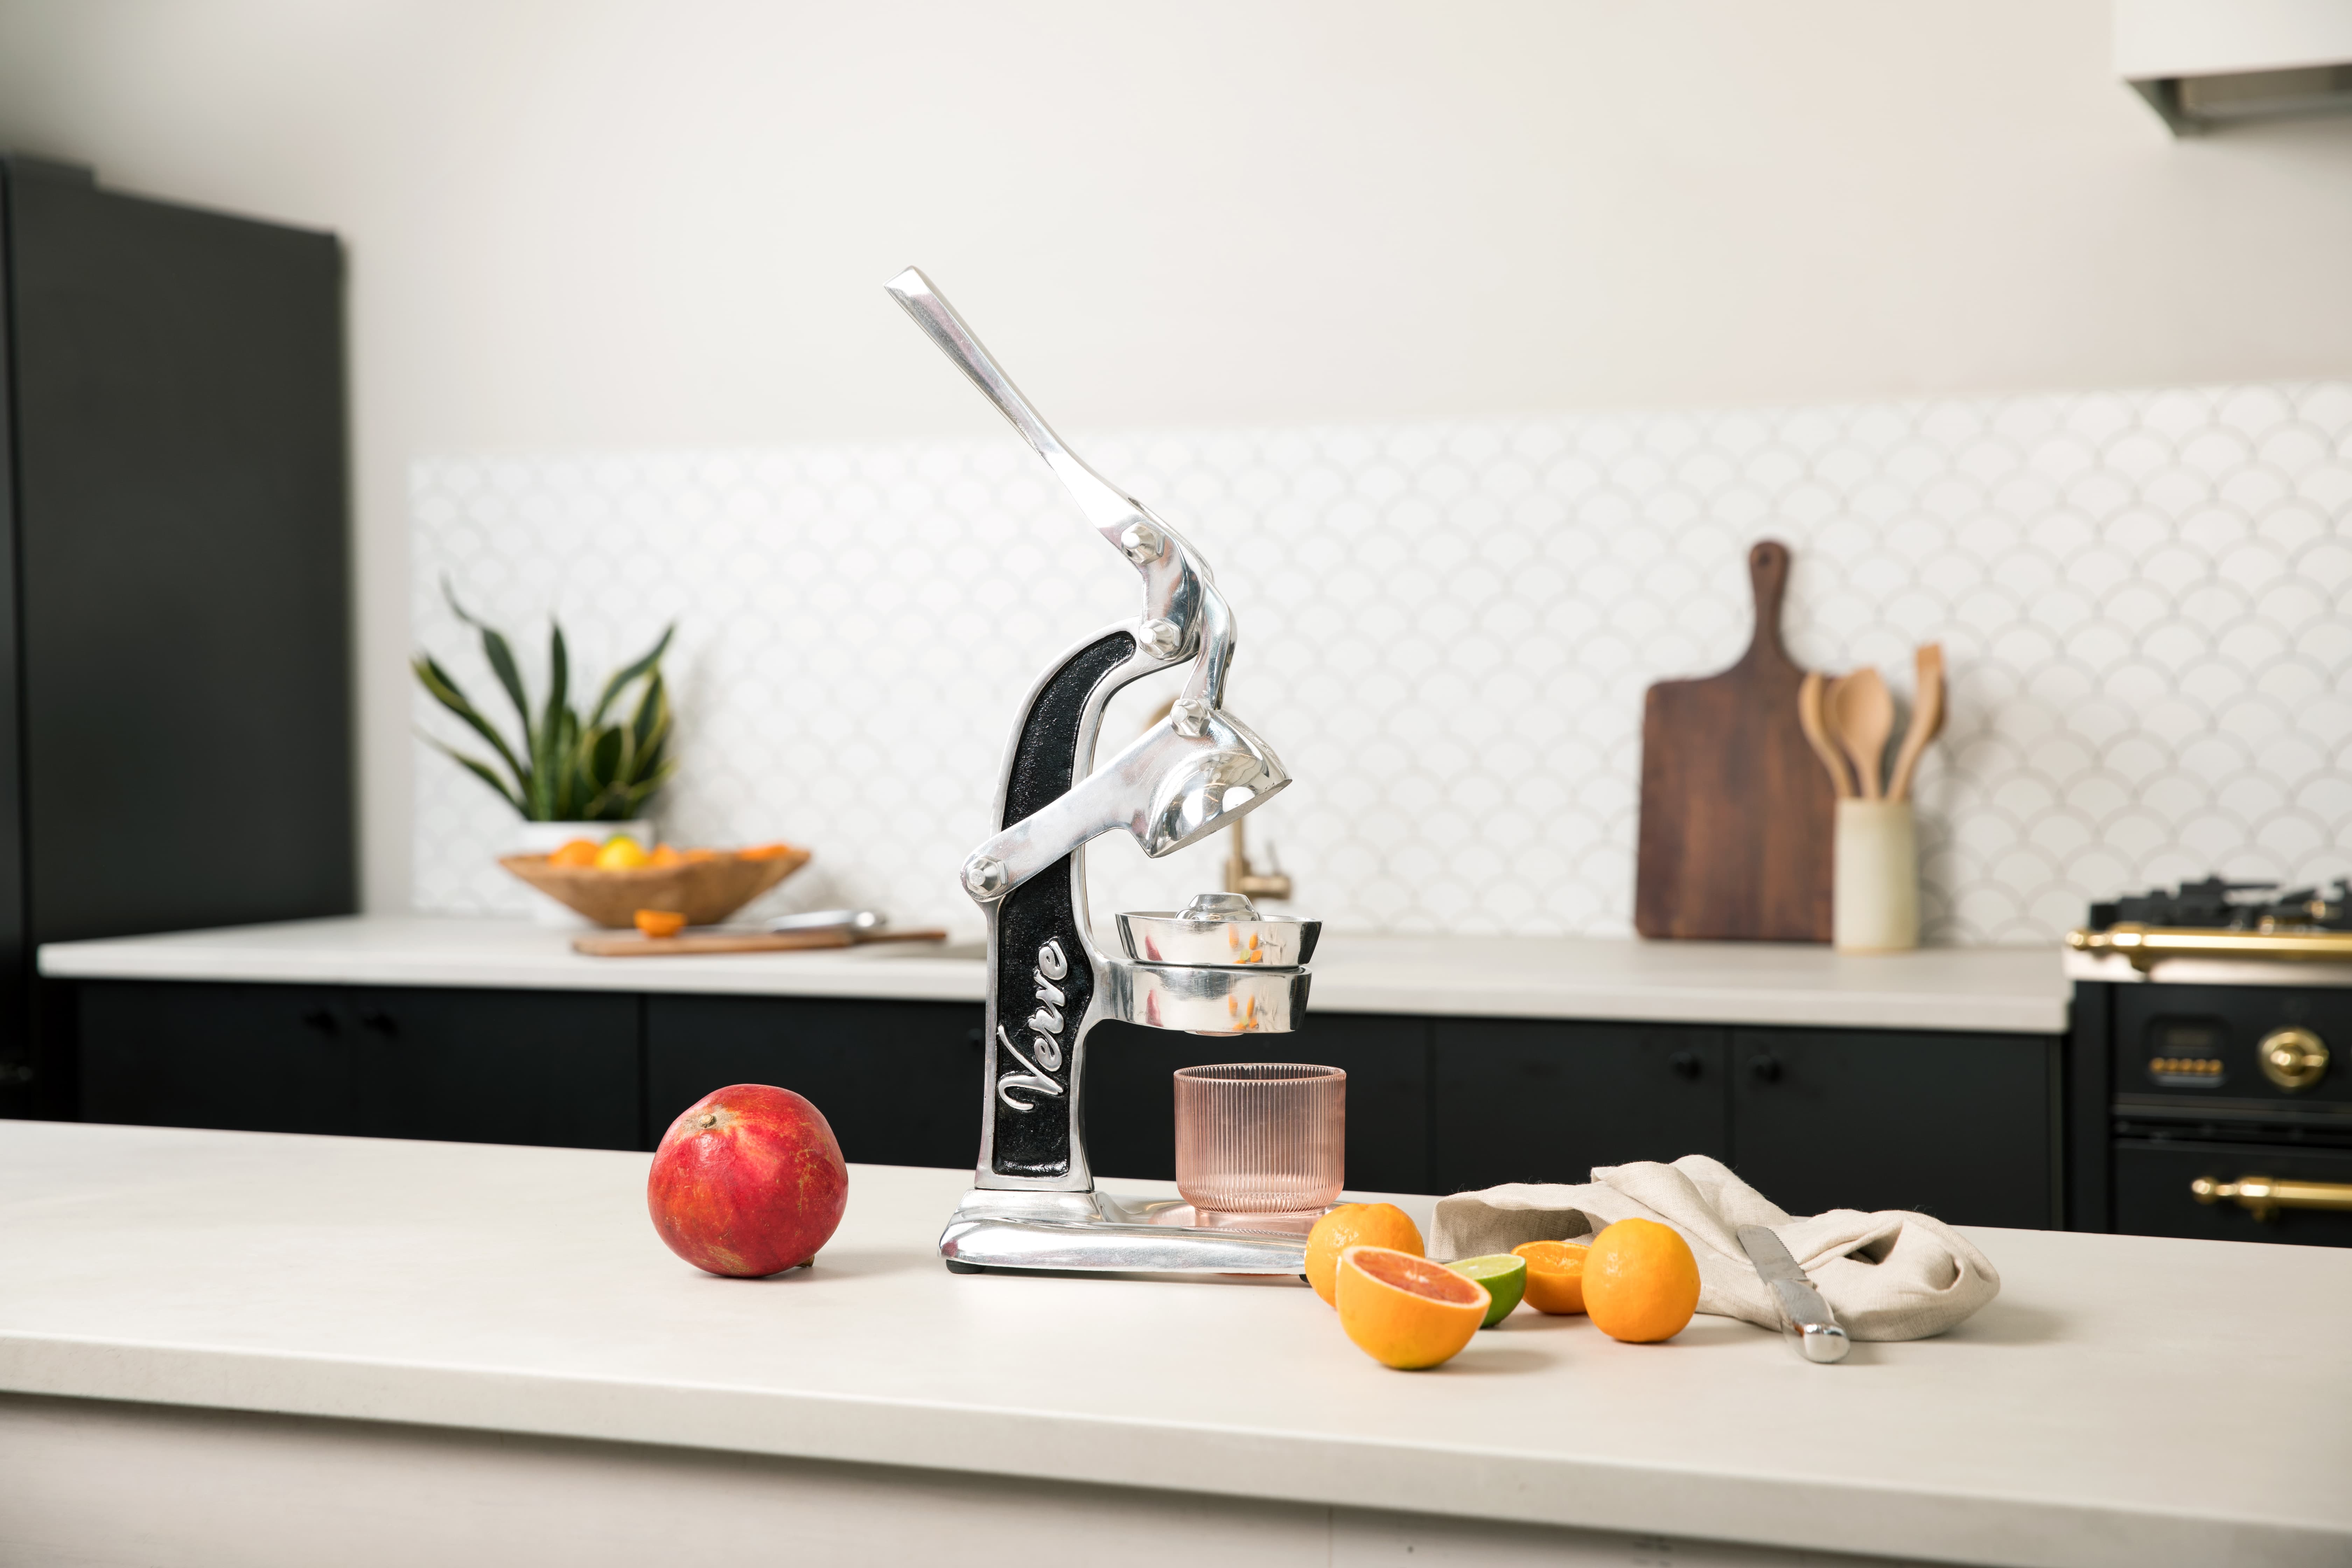 Bella Juicer on Sale! Create delicious Juice Right at Home!